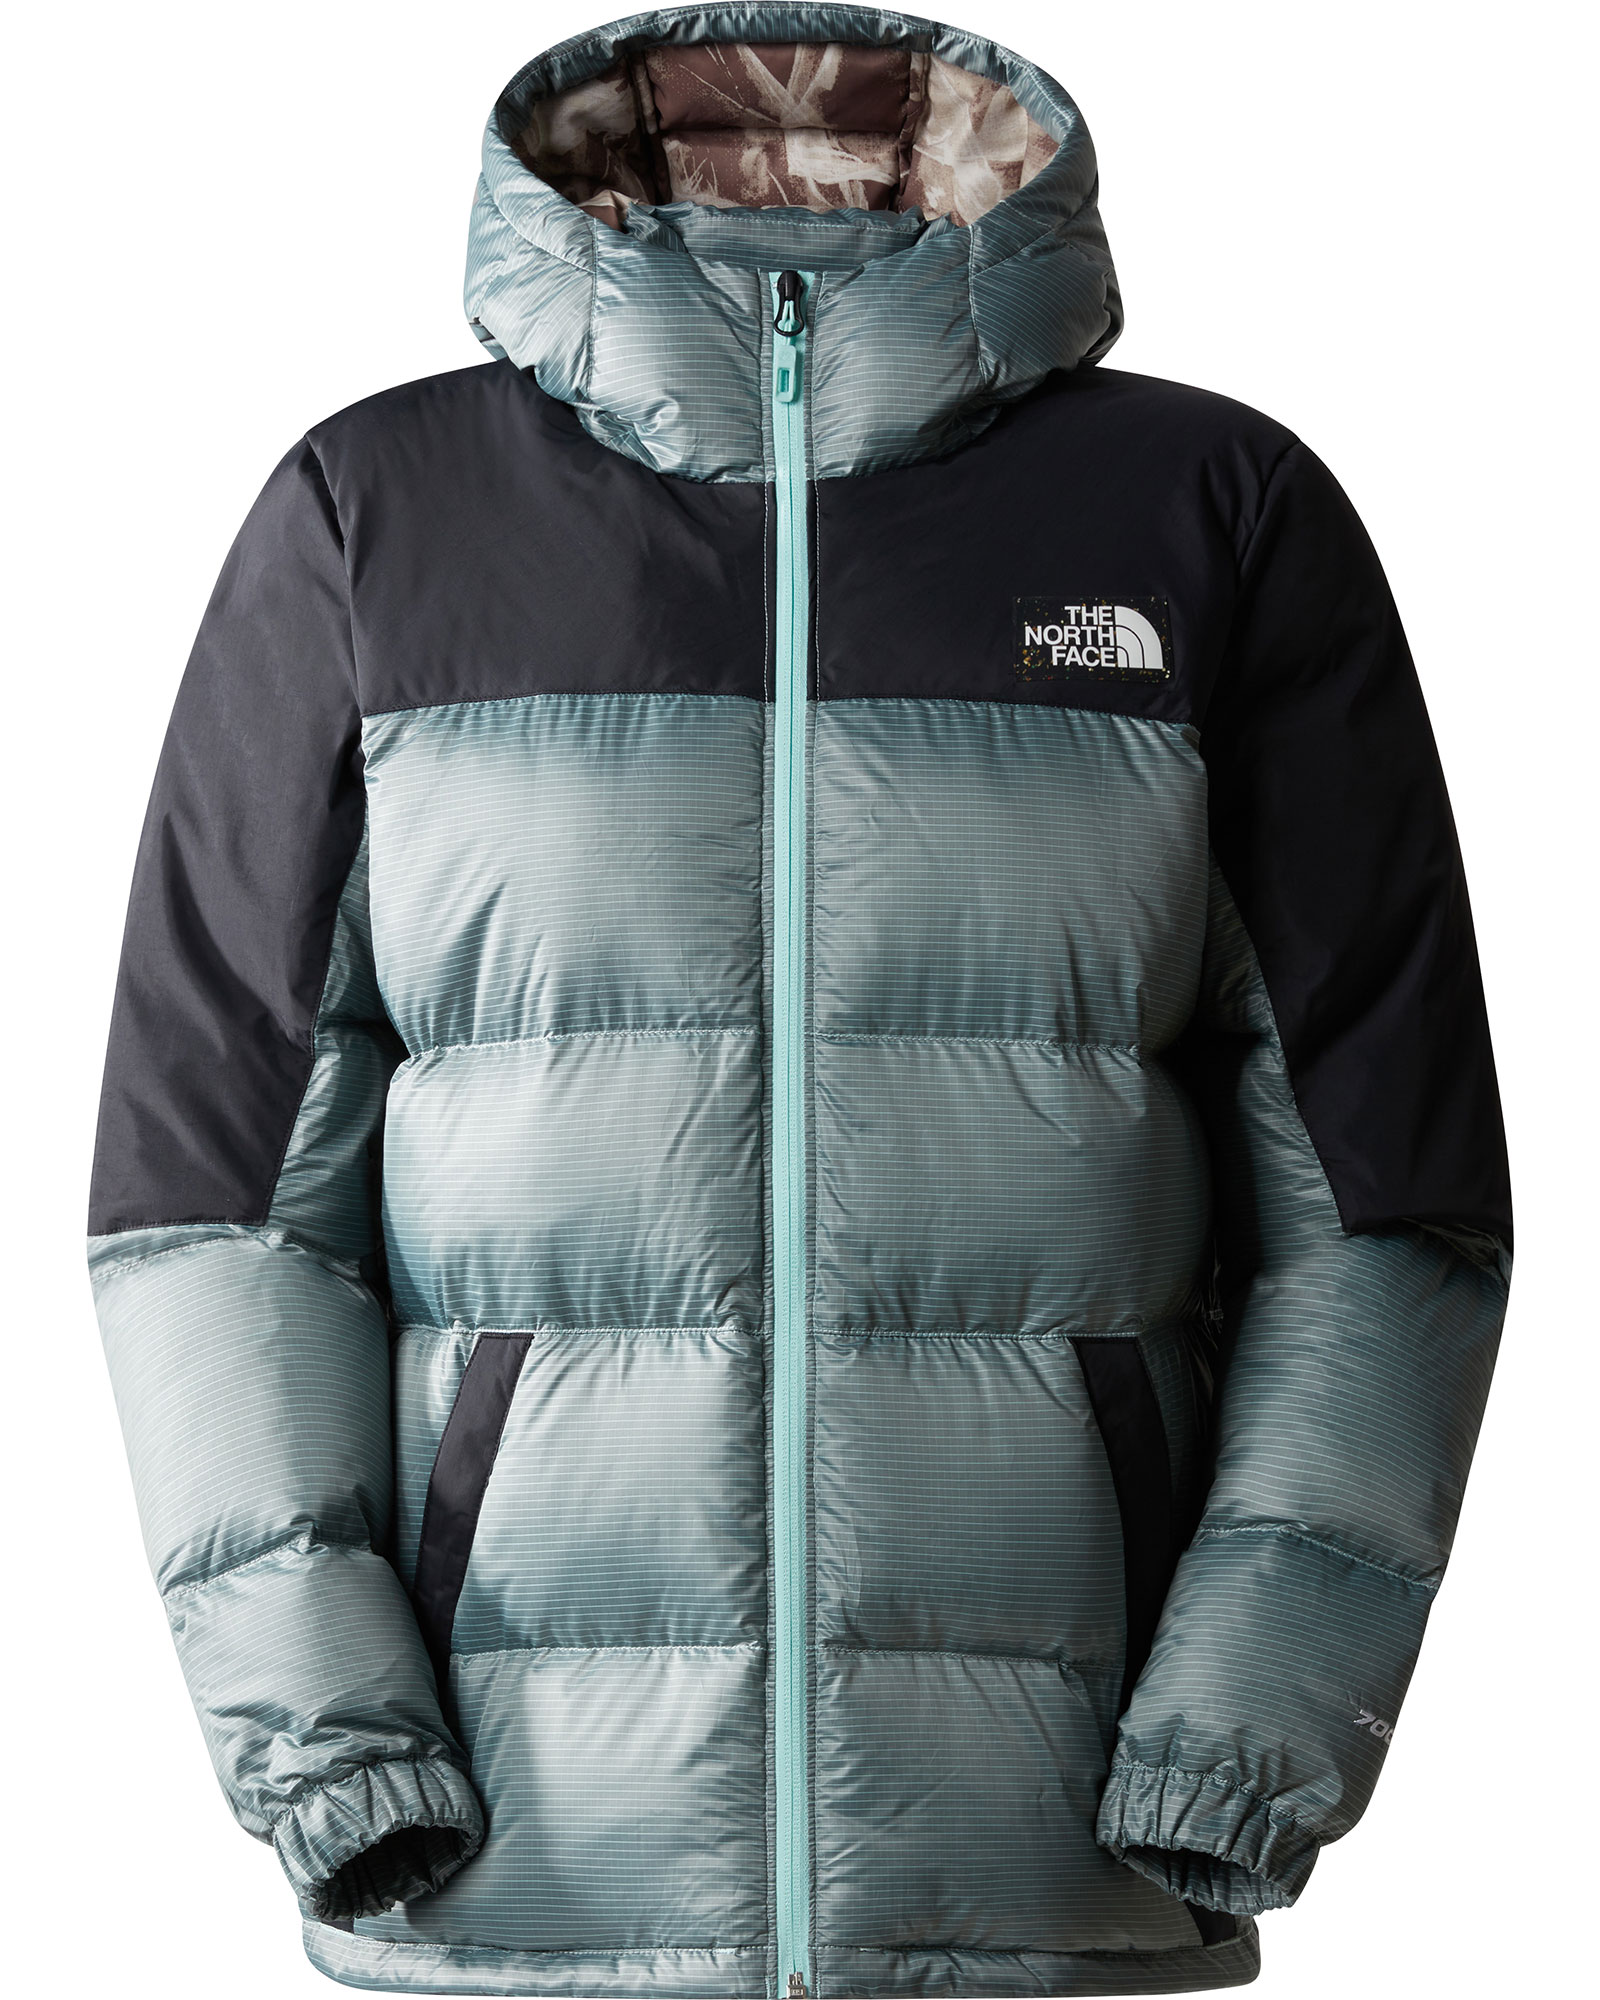 The North Face Diablo Recycled Women’s Down Hoodie - Powder Teal-TNF Black L